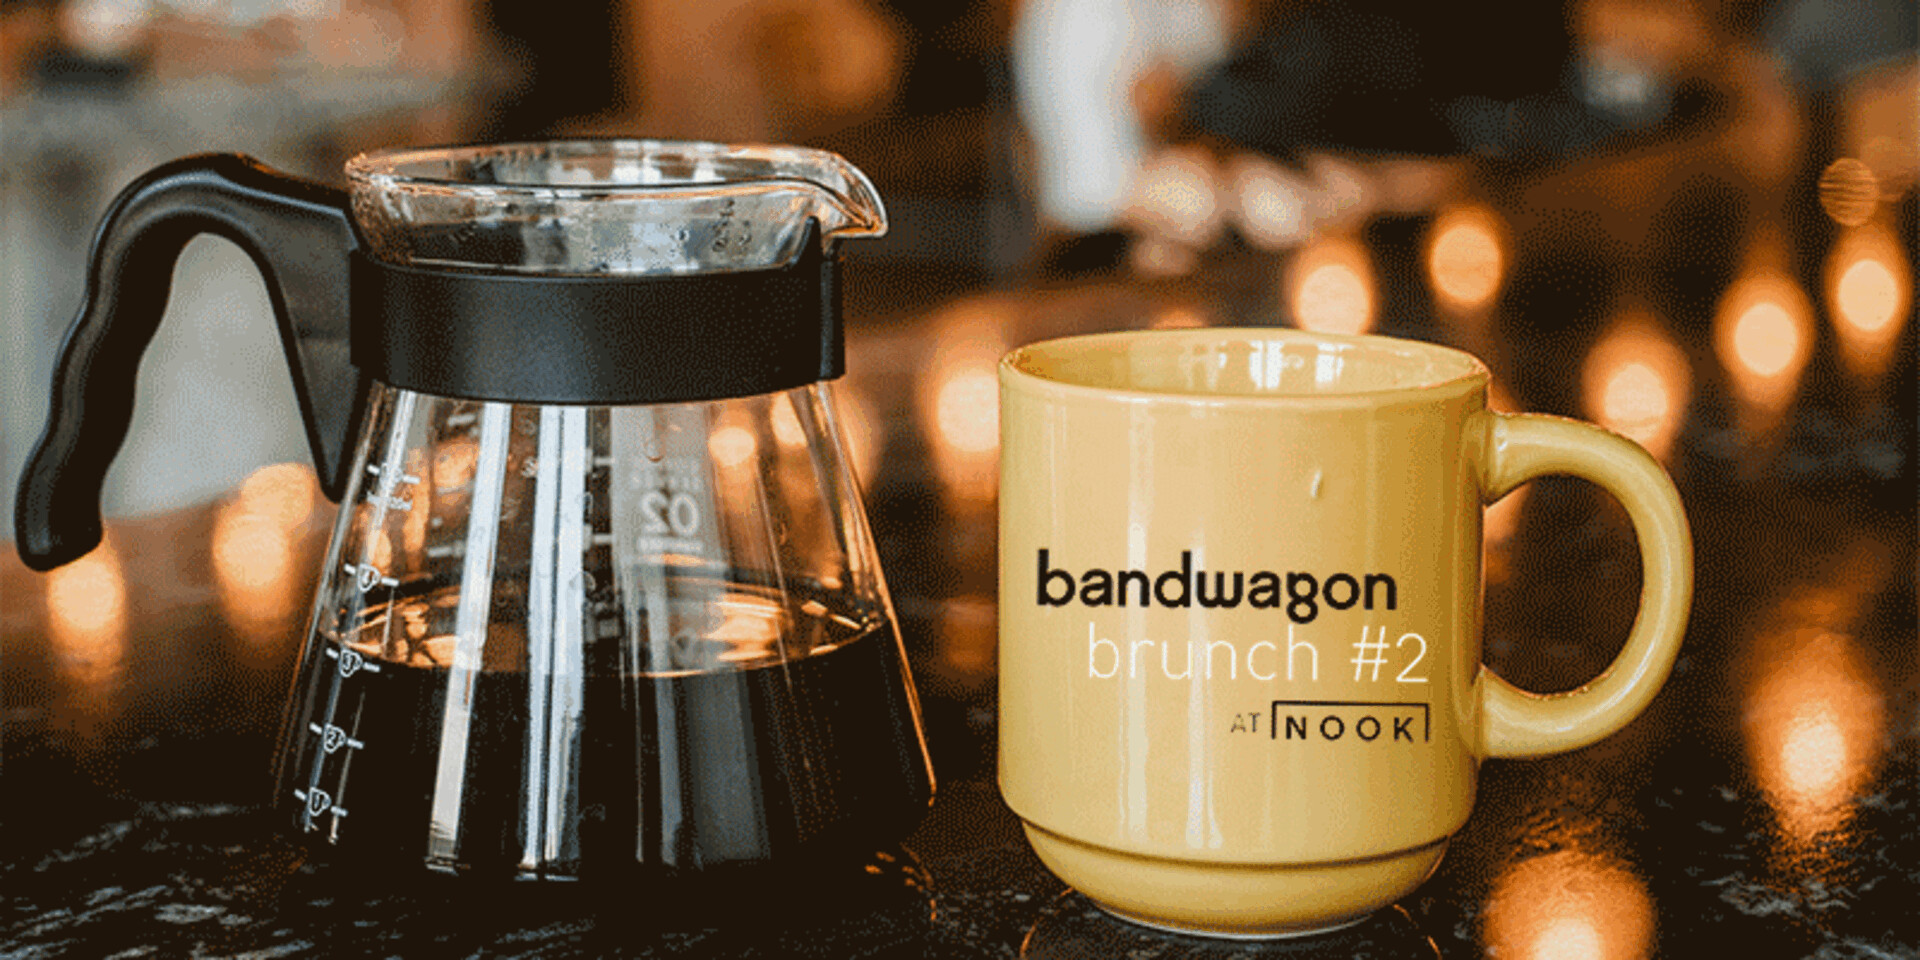 Enjoy music in the morning at Bandwagon Brunch at the Nook